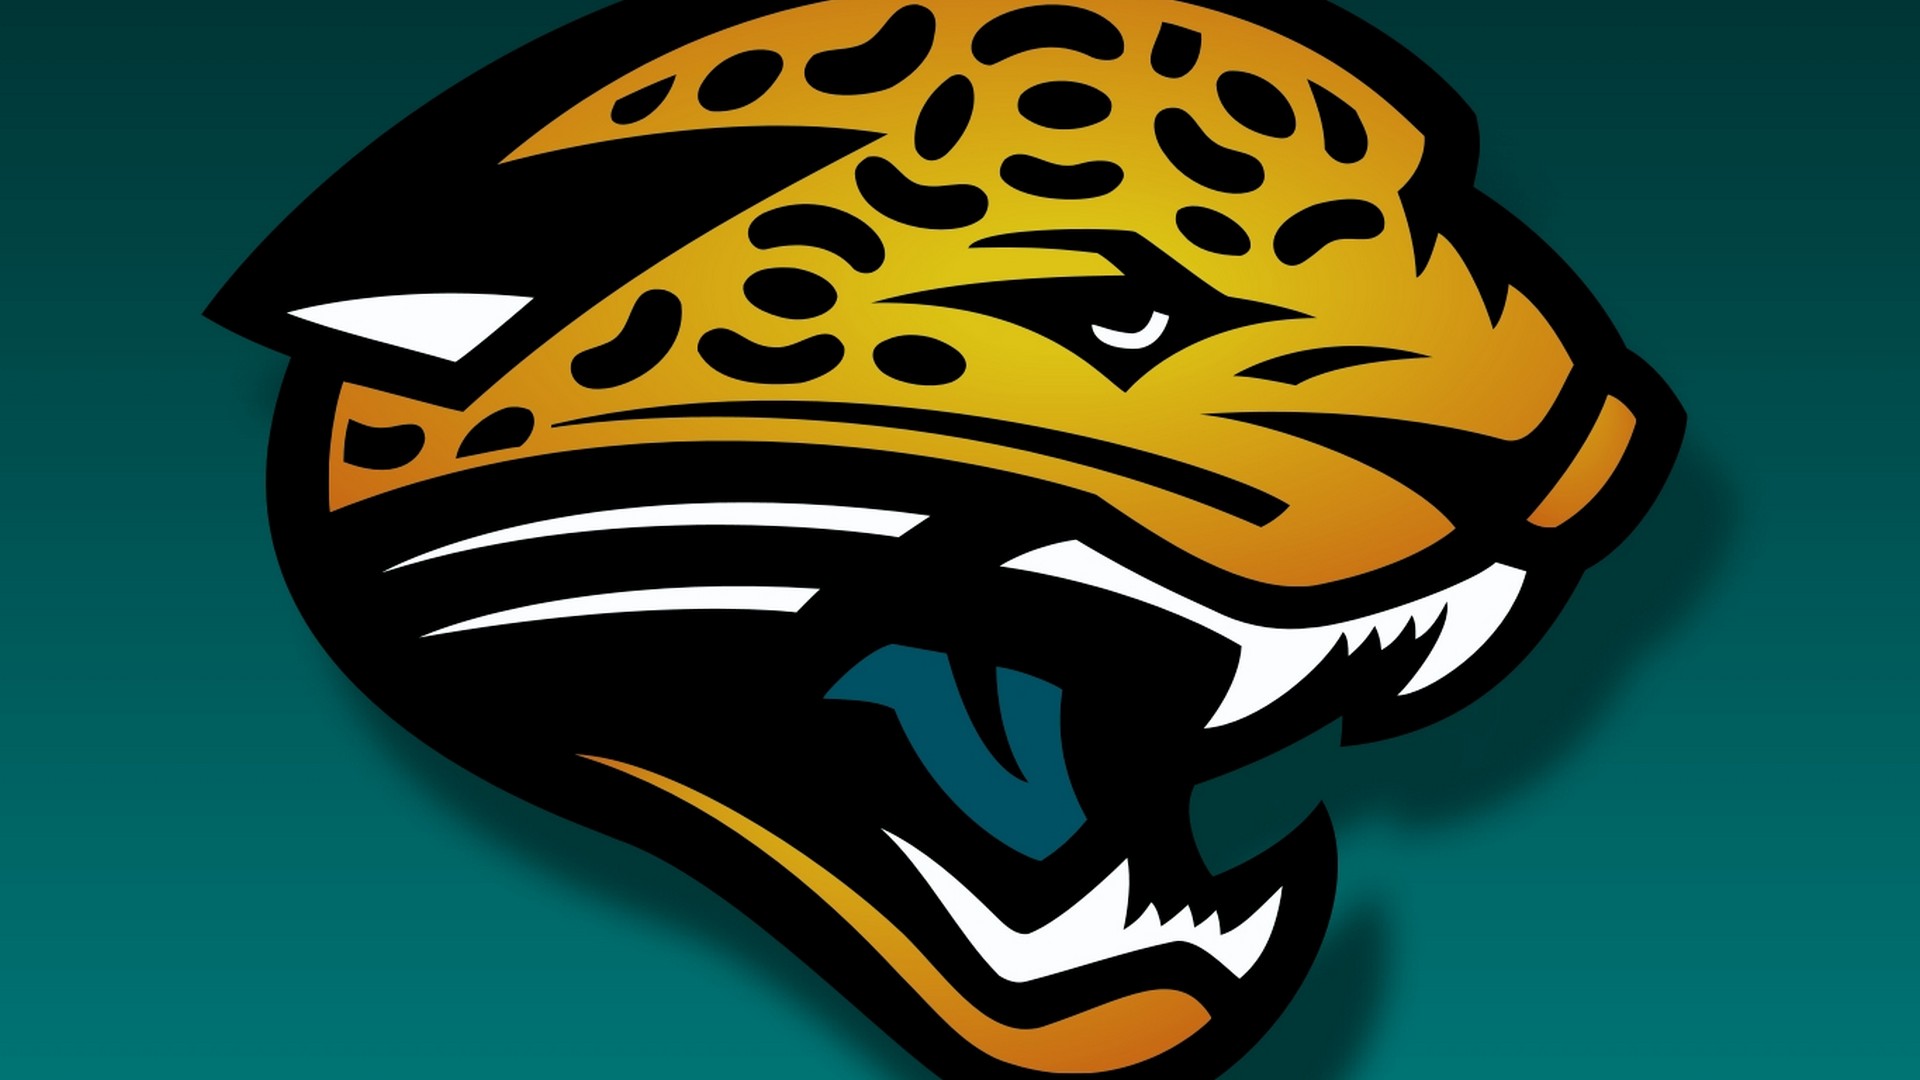 Jacksonville Jaguars Wallpaper For Mac with resolution 1920x1080 pixel. You can make this wallpaper for your Mac or Windows Desktop Background, iPhone, Android or Tablet and another Smartphone device